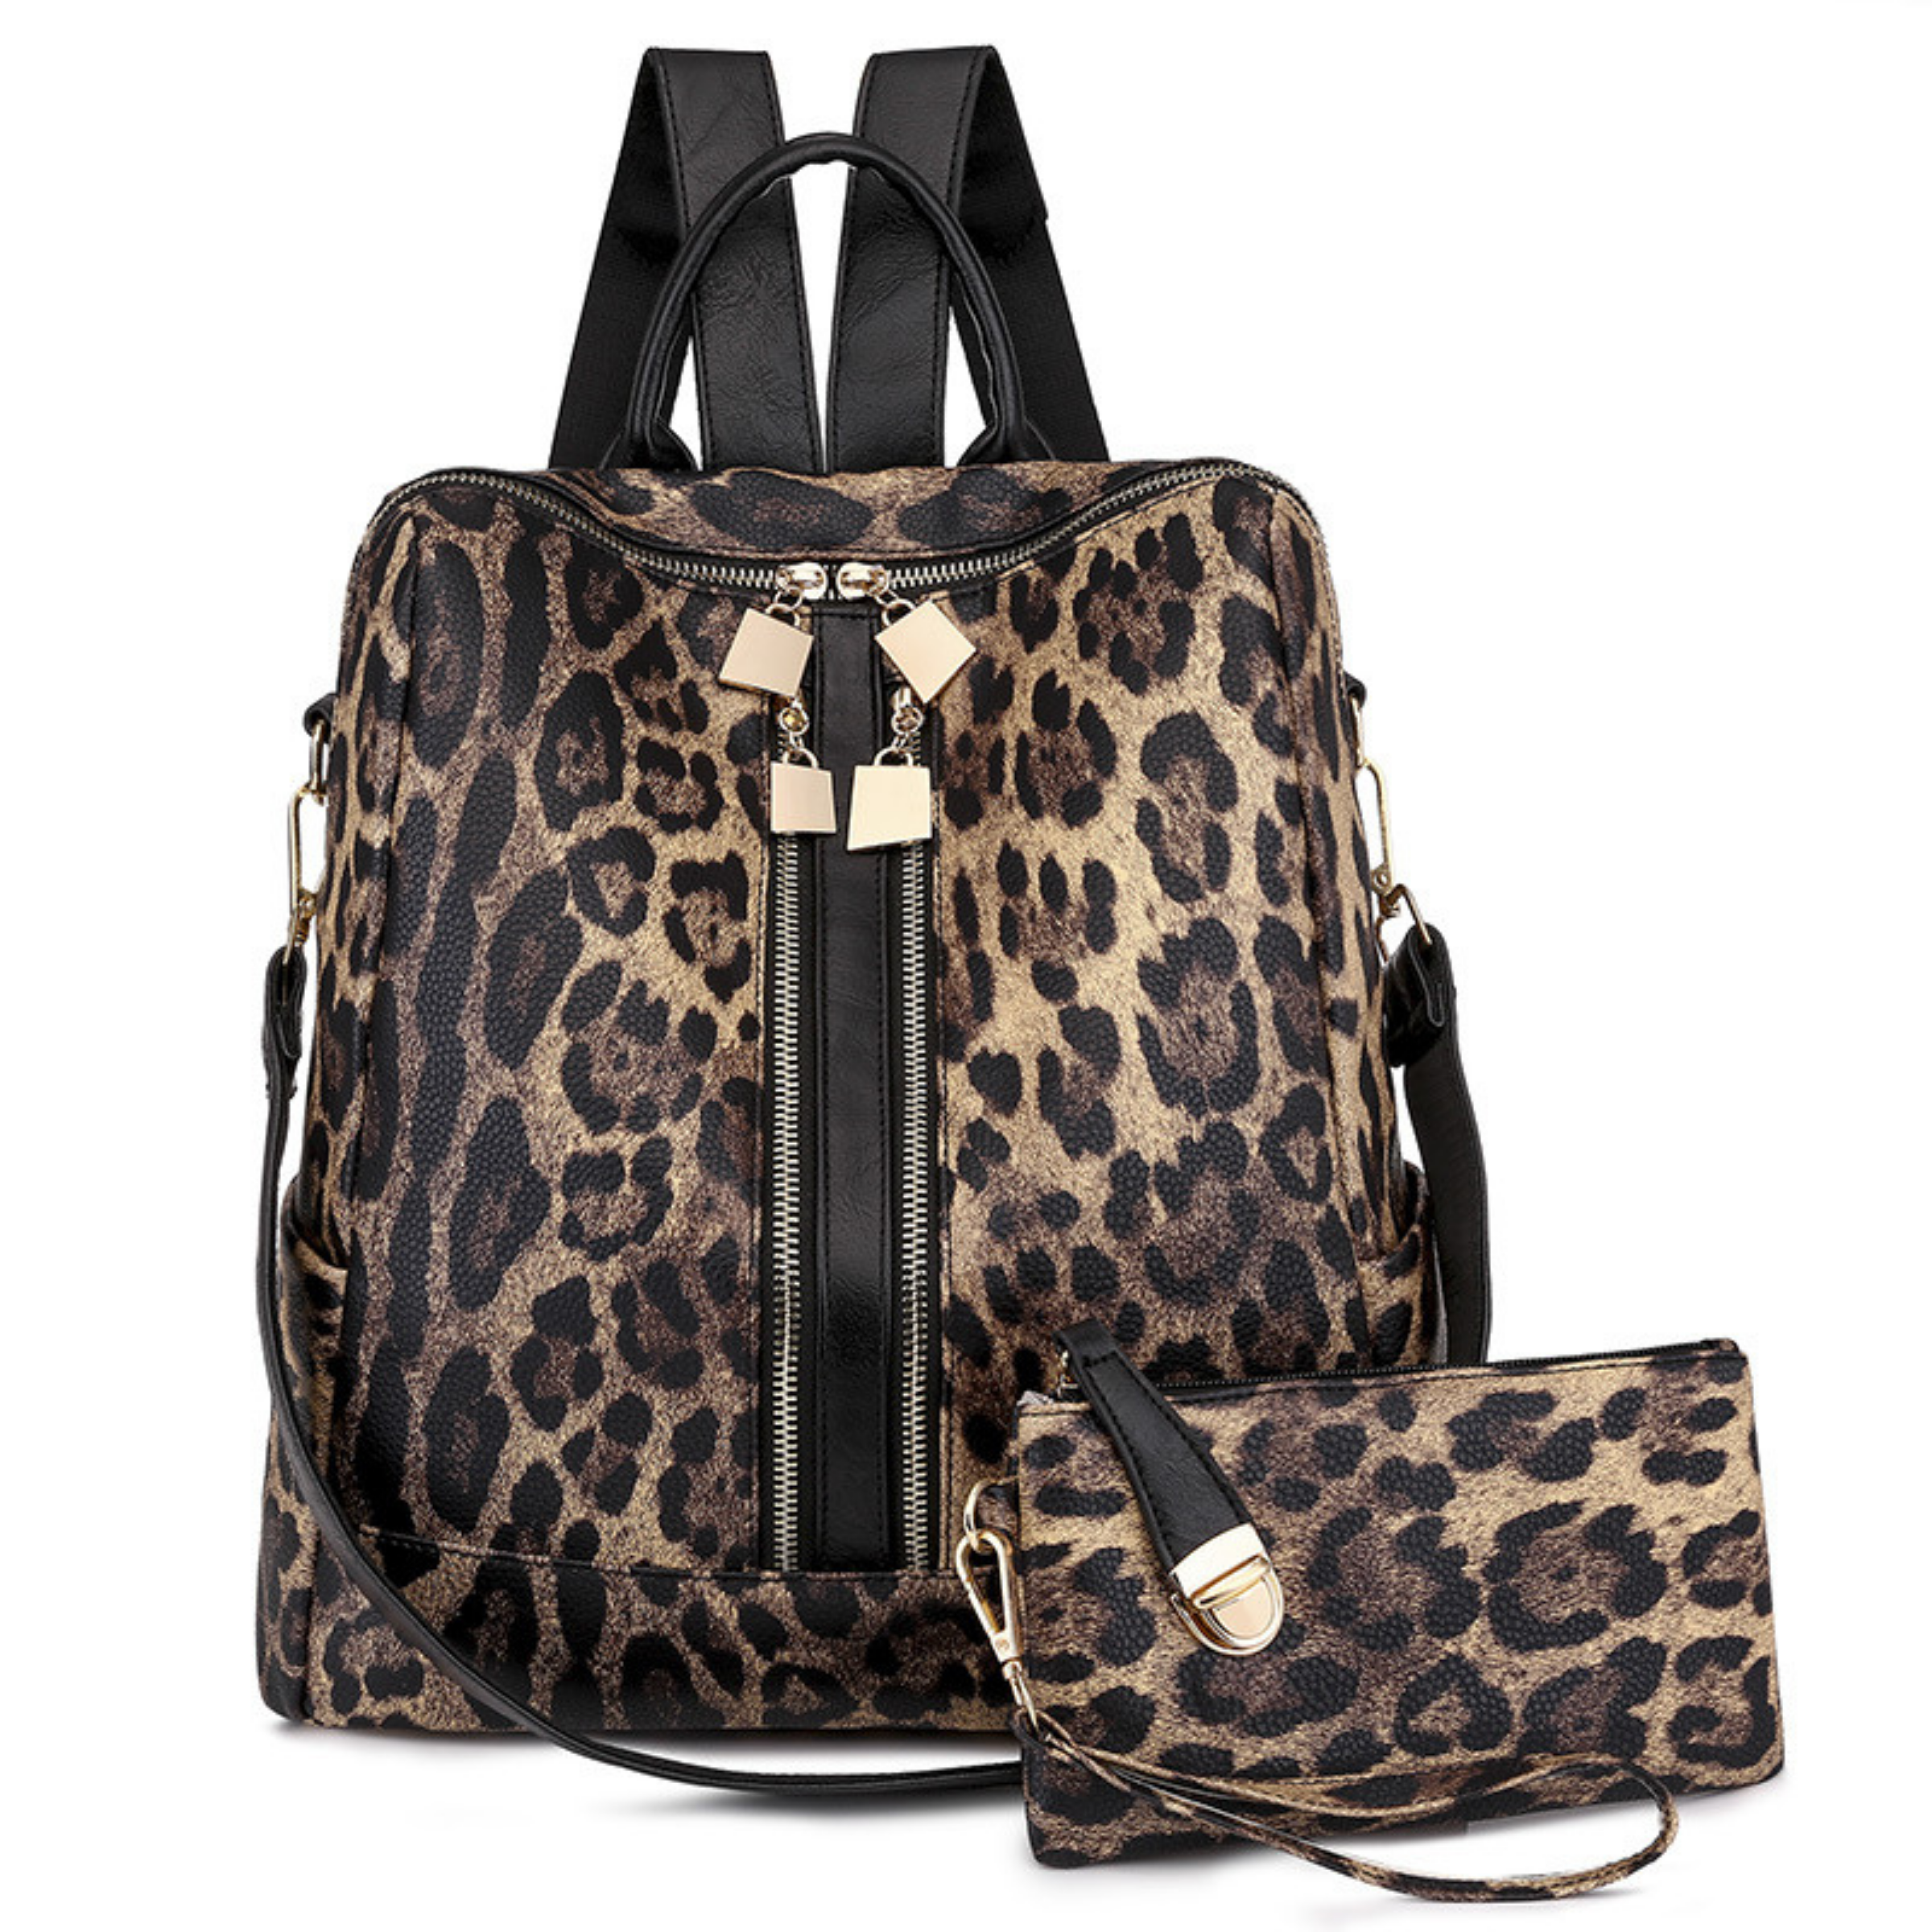 Johnature Retro Genuine Leather Animal Print Backpack Women Natural Real  Cowhide Bag Large Capacity Travel Backpacks - buy Johnature Retro Genuine  Leather Animal Print Backpack Women Natural Real Cowhide Bag Large Capacity